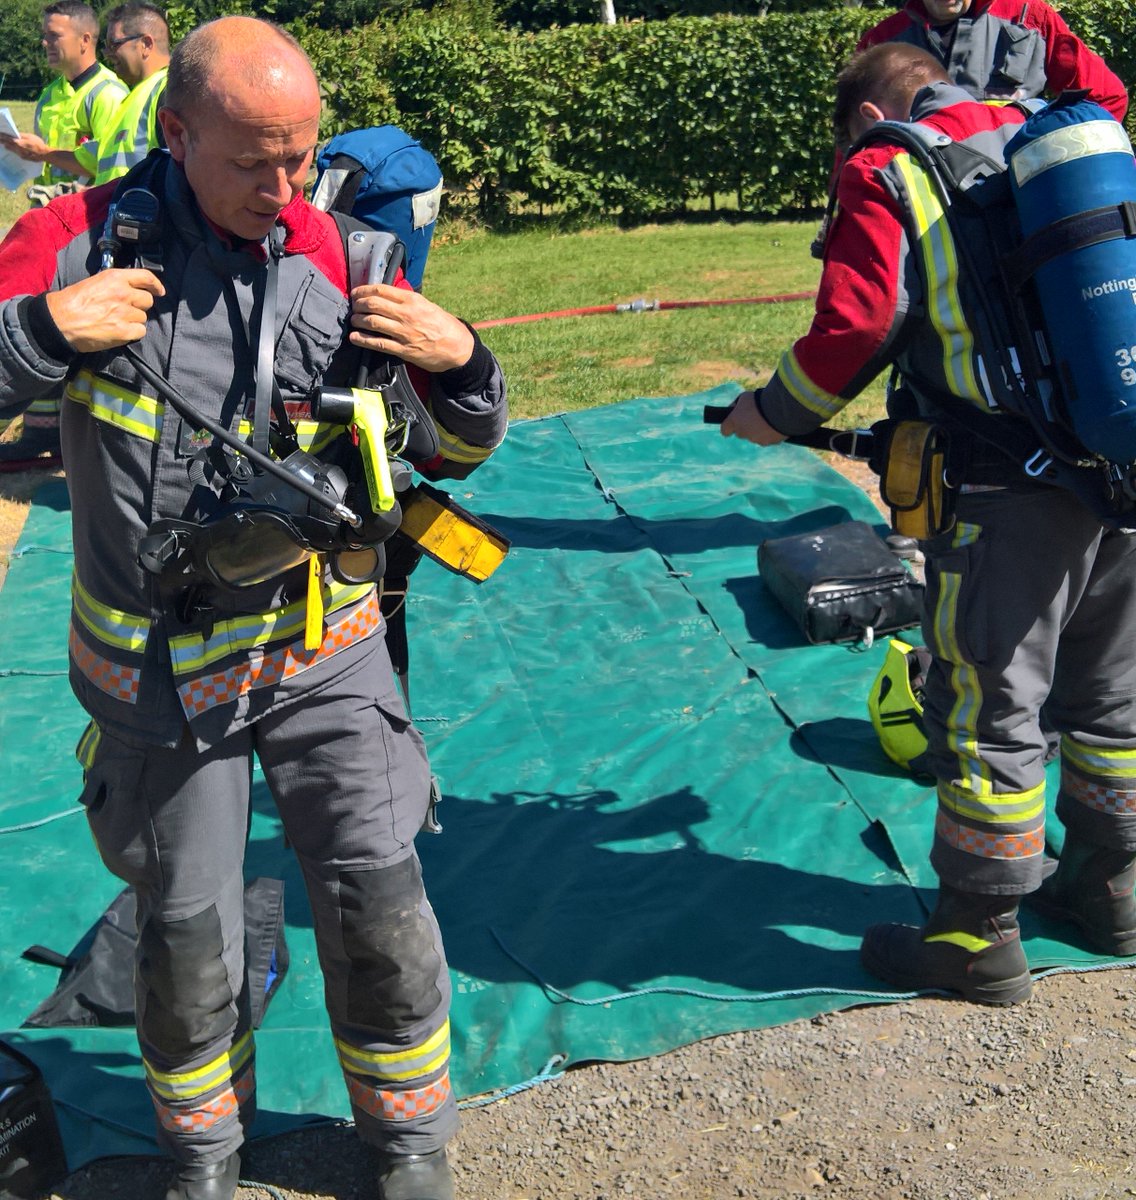 This week @DPO_Carley & I gained an insite as to how @nottsfire crews deal with #ChemicalSpills as #BlueWatch from #ArnoldFS #CarltonFS #StockhillFS & RDS from #HucknallFS were put through a training exercise. #OneTeam #CreatingSaferCommunities #GreatWork